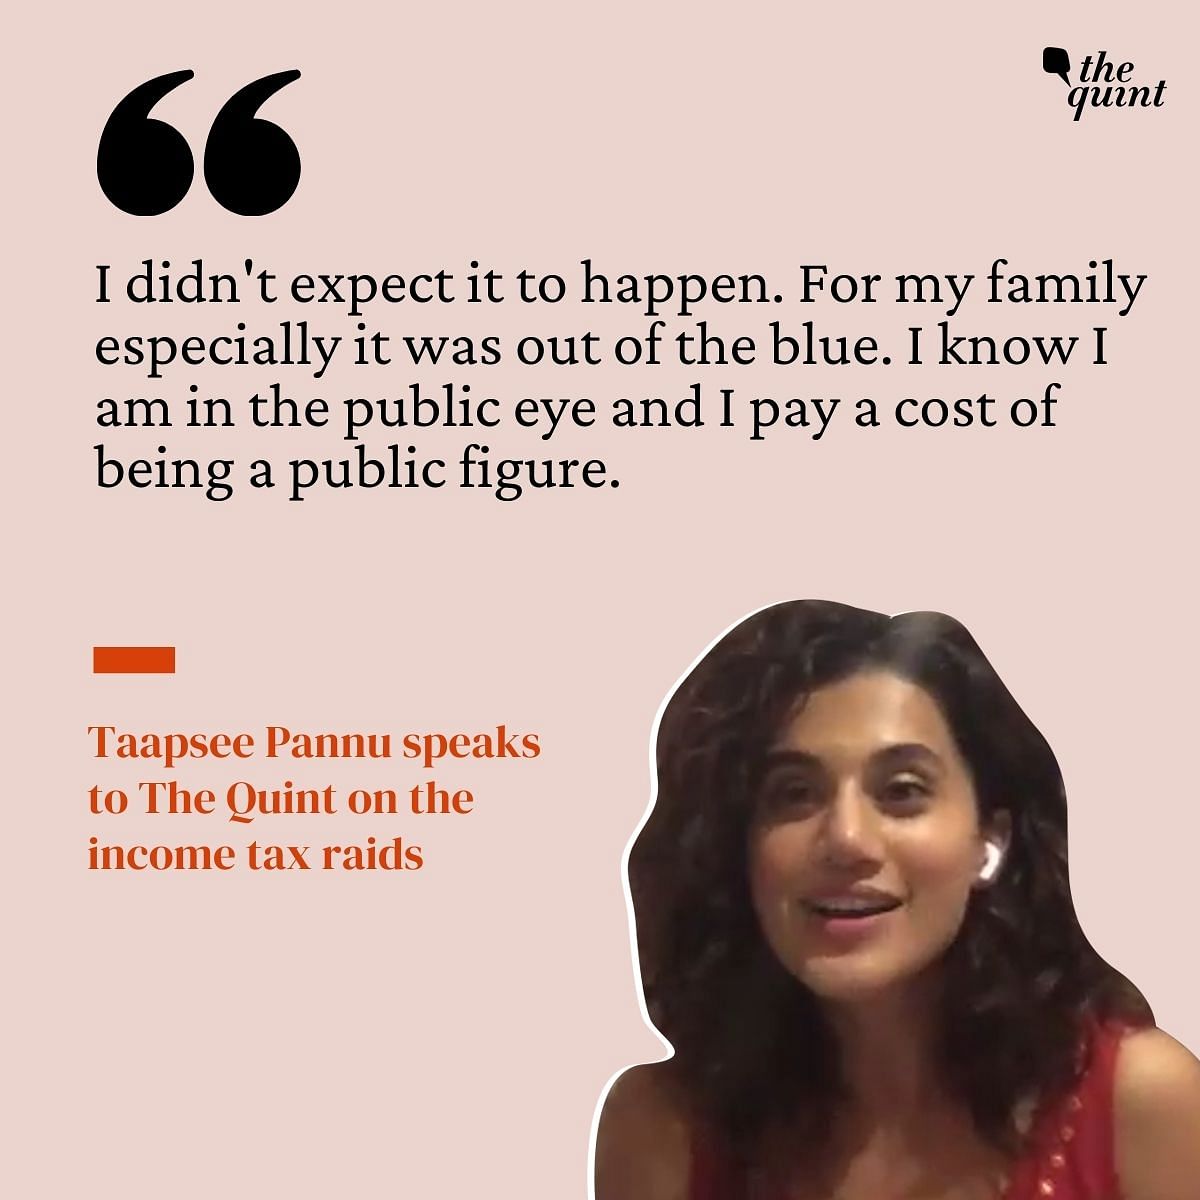 Here’s Taapsee Pannu in an exclusive chat with The Quint.